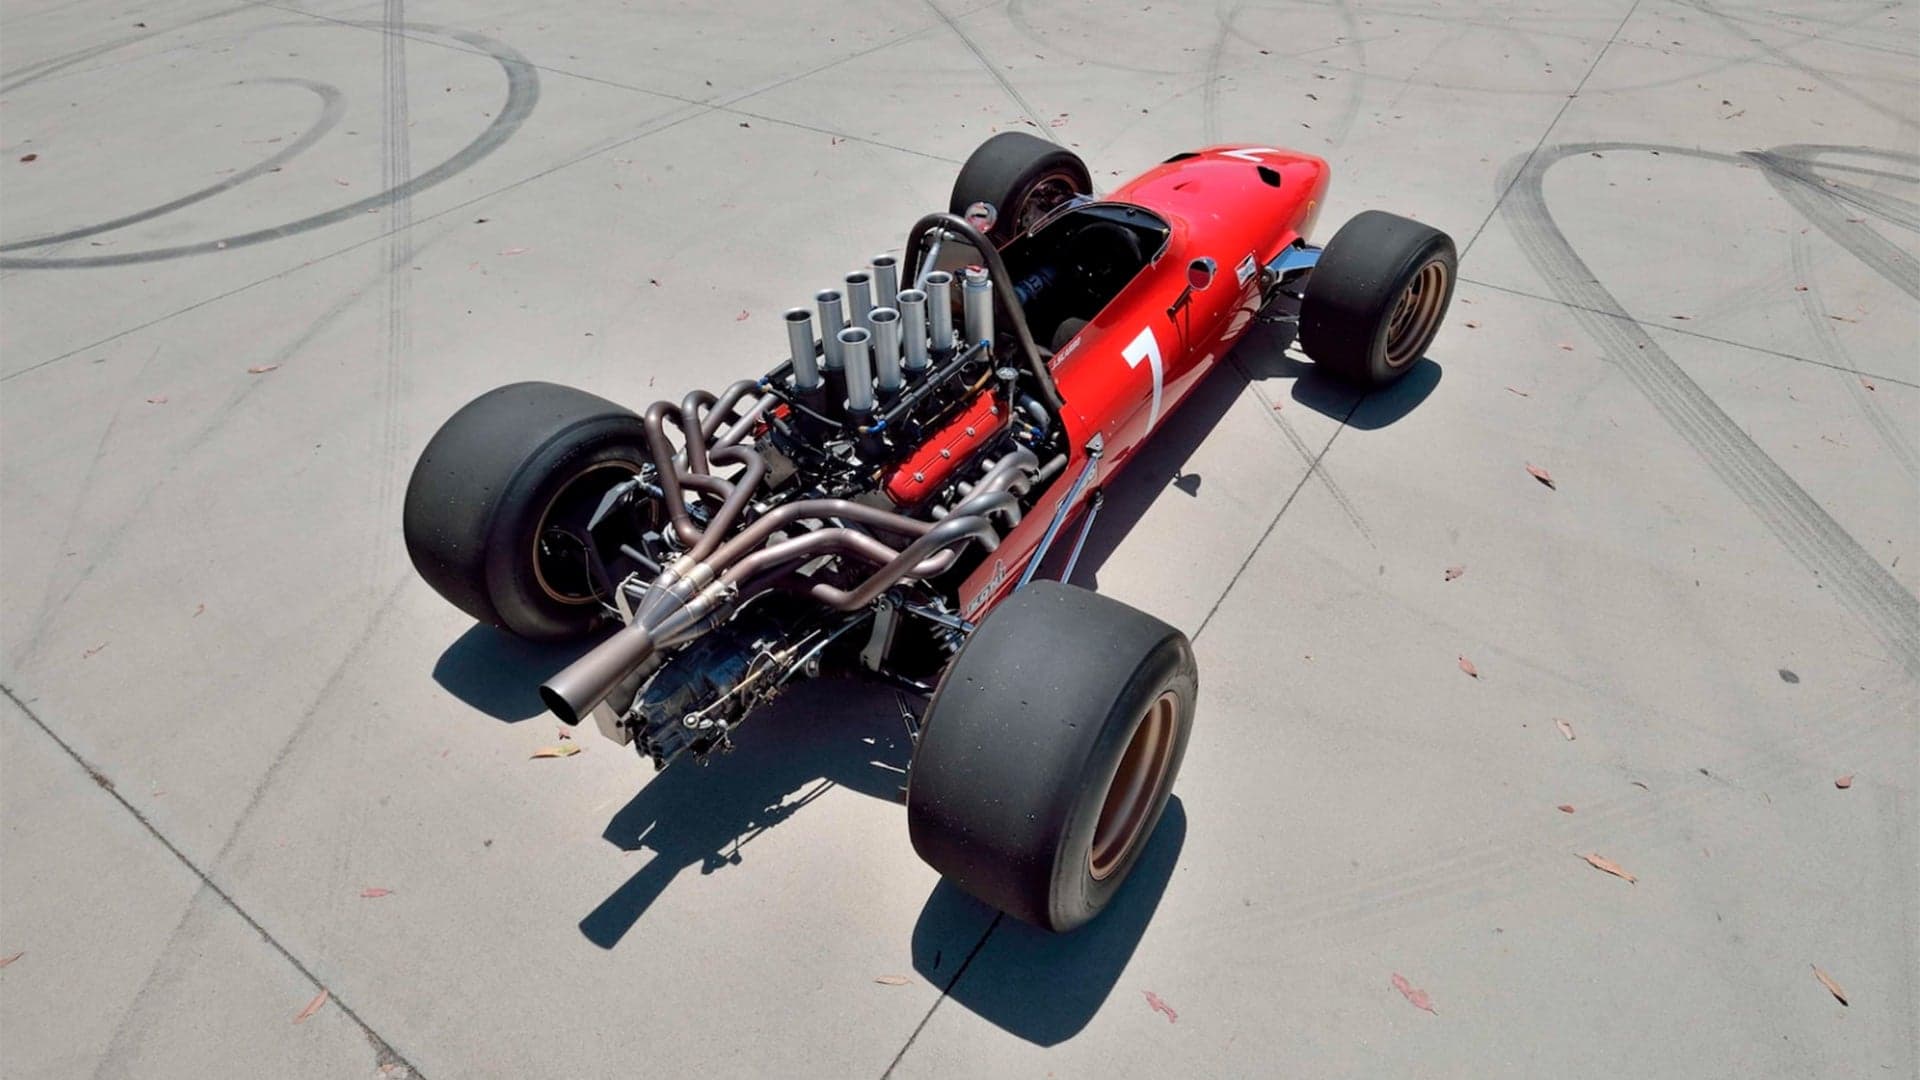 This One-of-Two, Corvette-Engined, Ferrari Formula 1-Inspired Race Car Could Be Yours